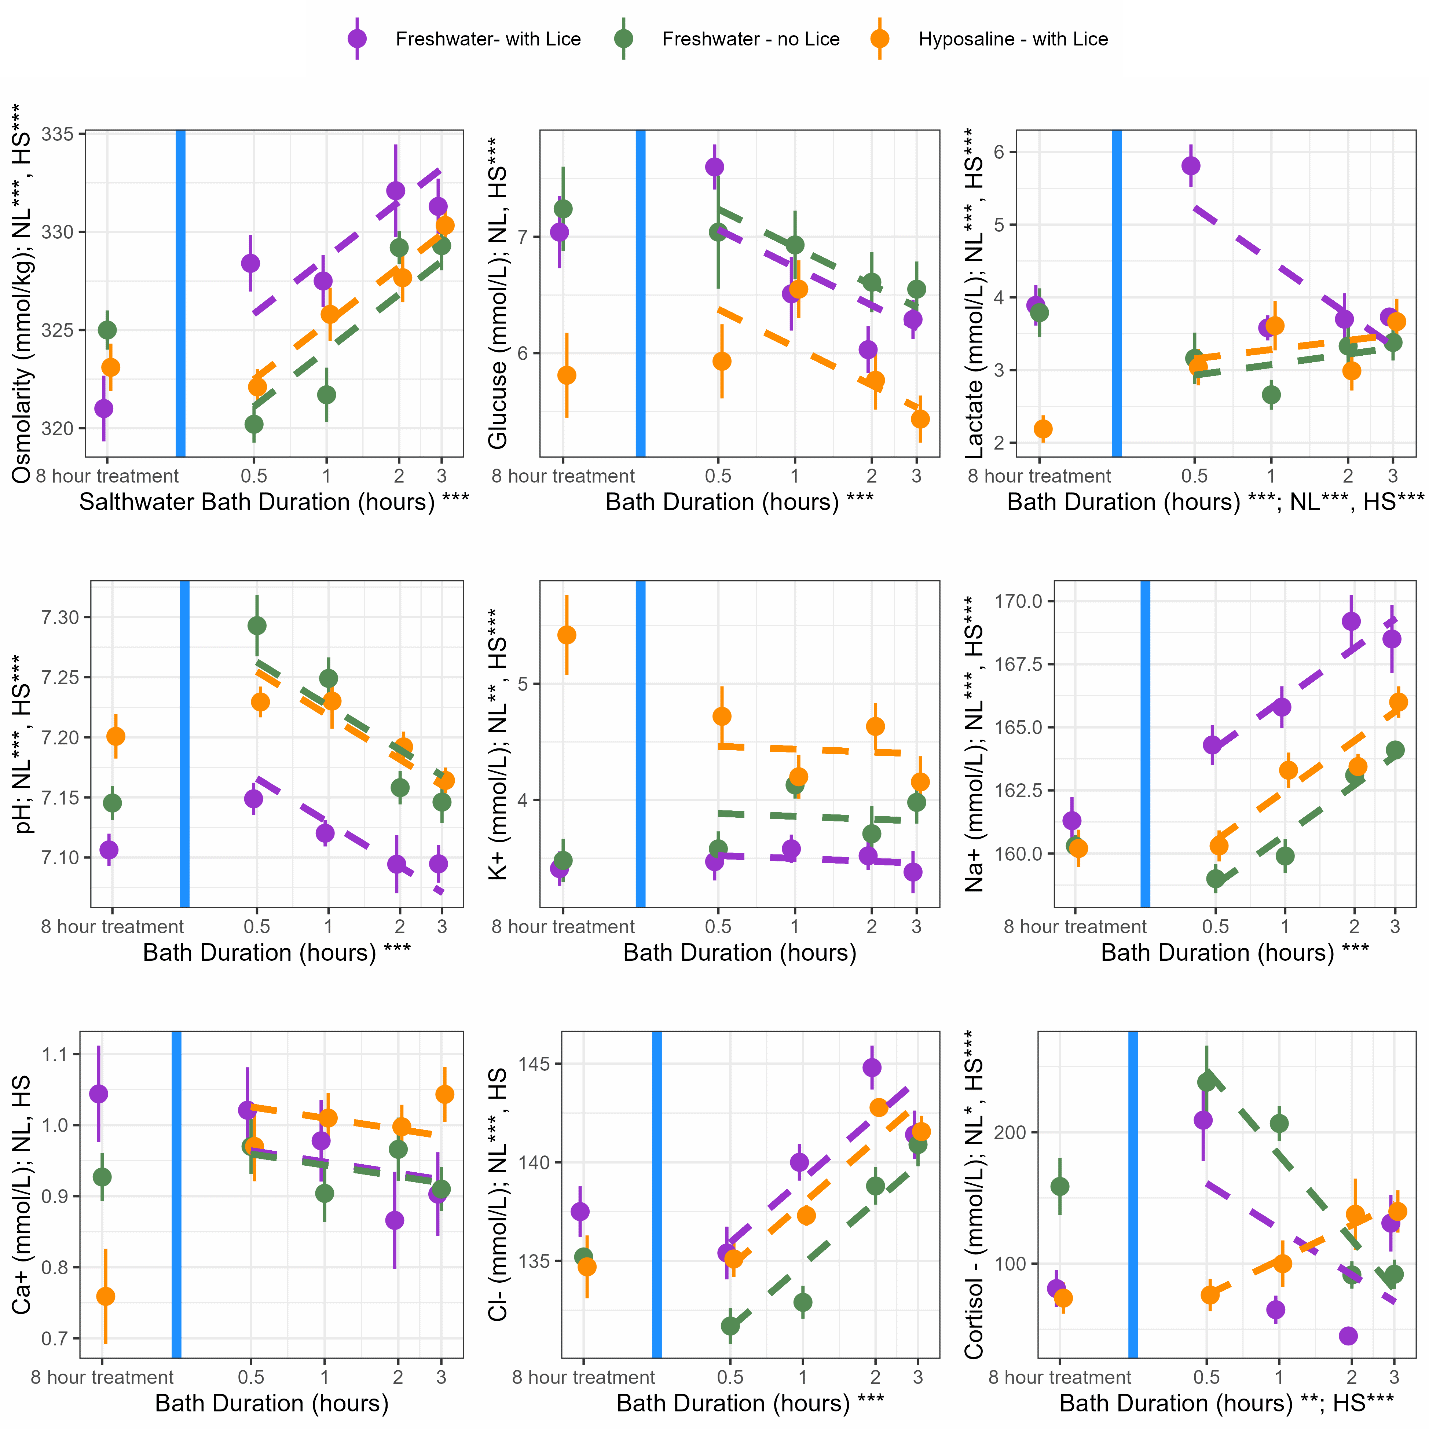 A figure with 9 subplots. Plots show the mean measurement of the blood parameter at that bath duration. The data points are separated by treatment type. Here is a table of all the mean data points in the plot. 

Treatment	Bath Duration (minutes)	Osmolarity (mmol/kg); NL***, HS***	Glucuse (mmol/L); NL*, HS***